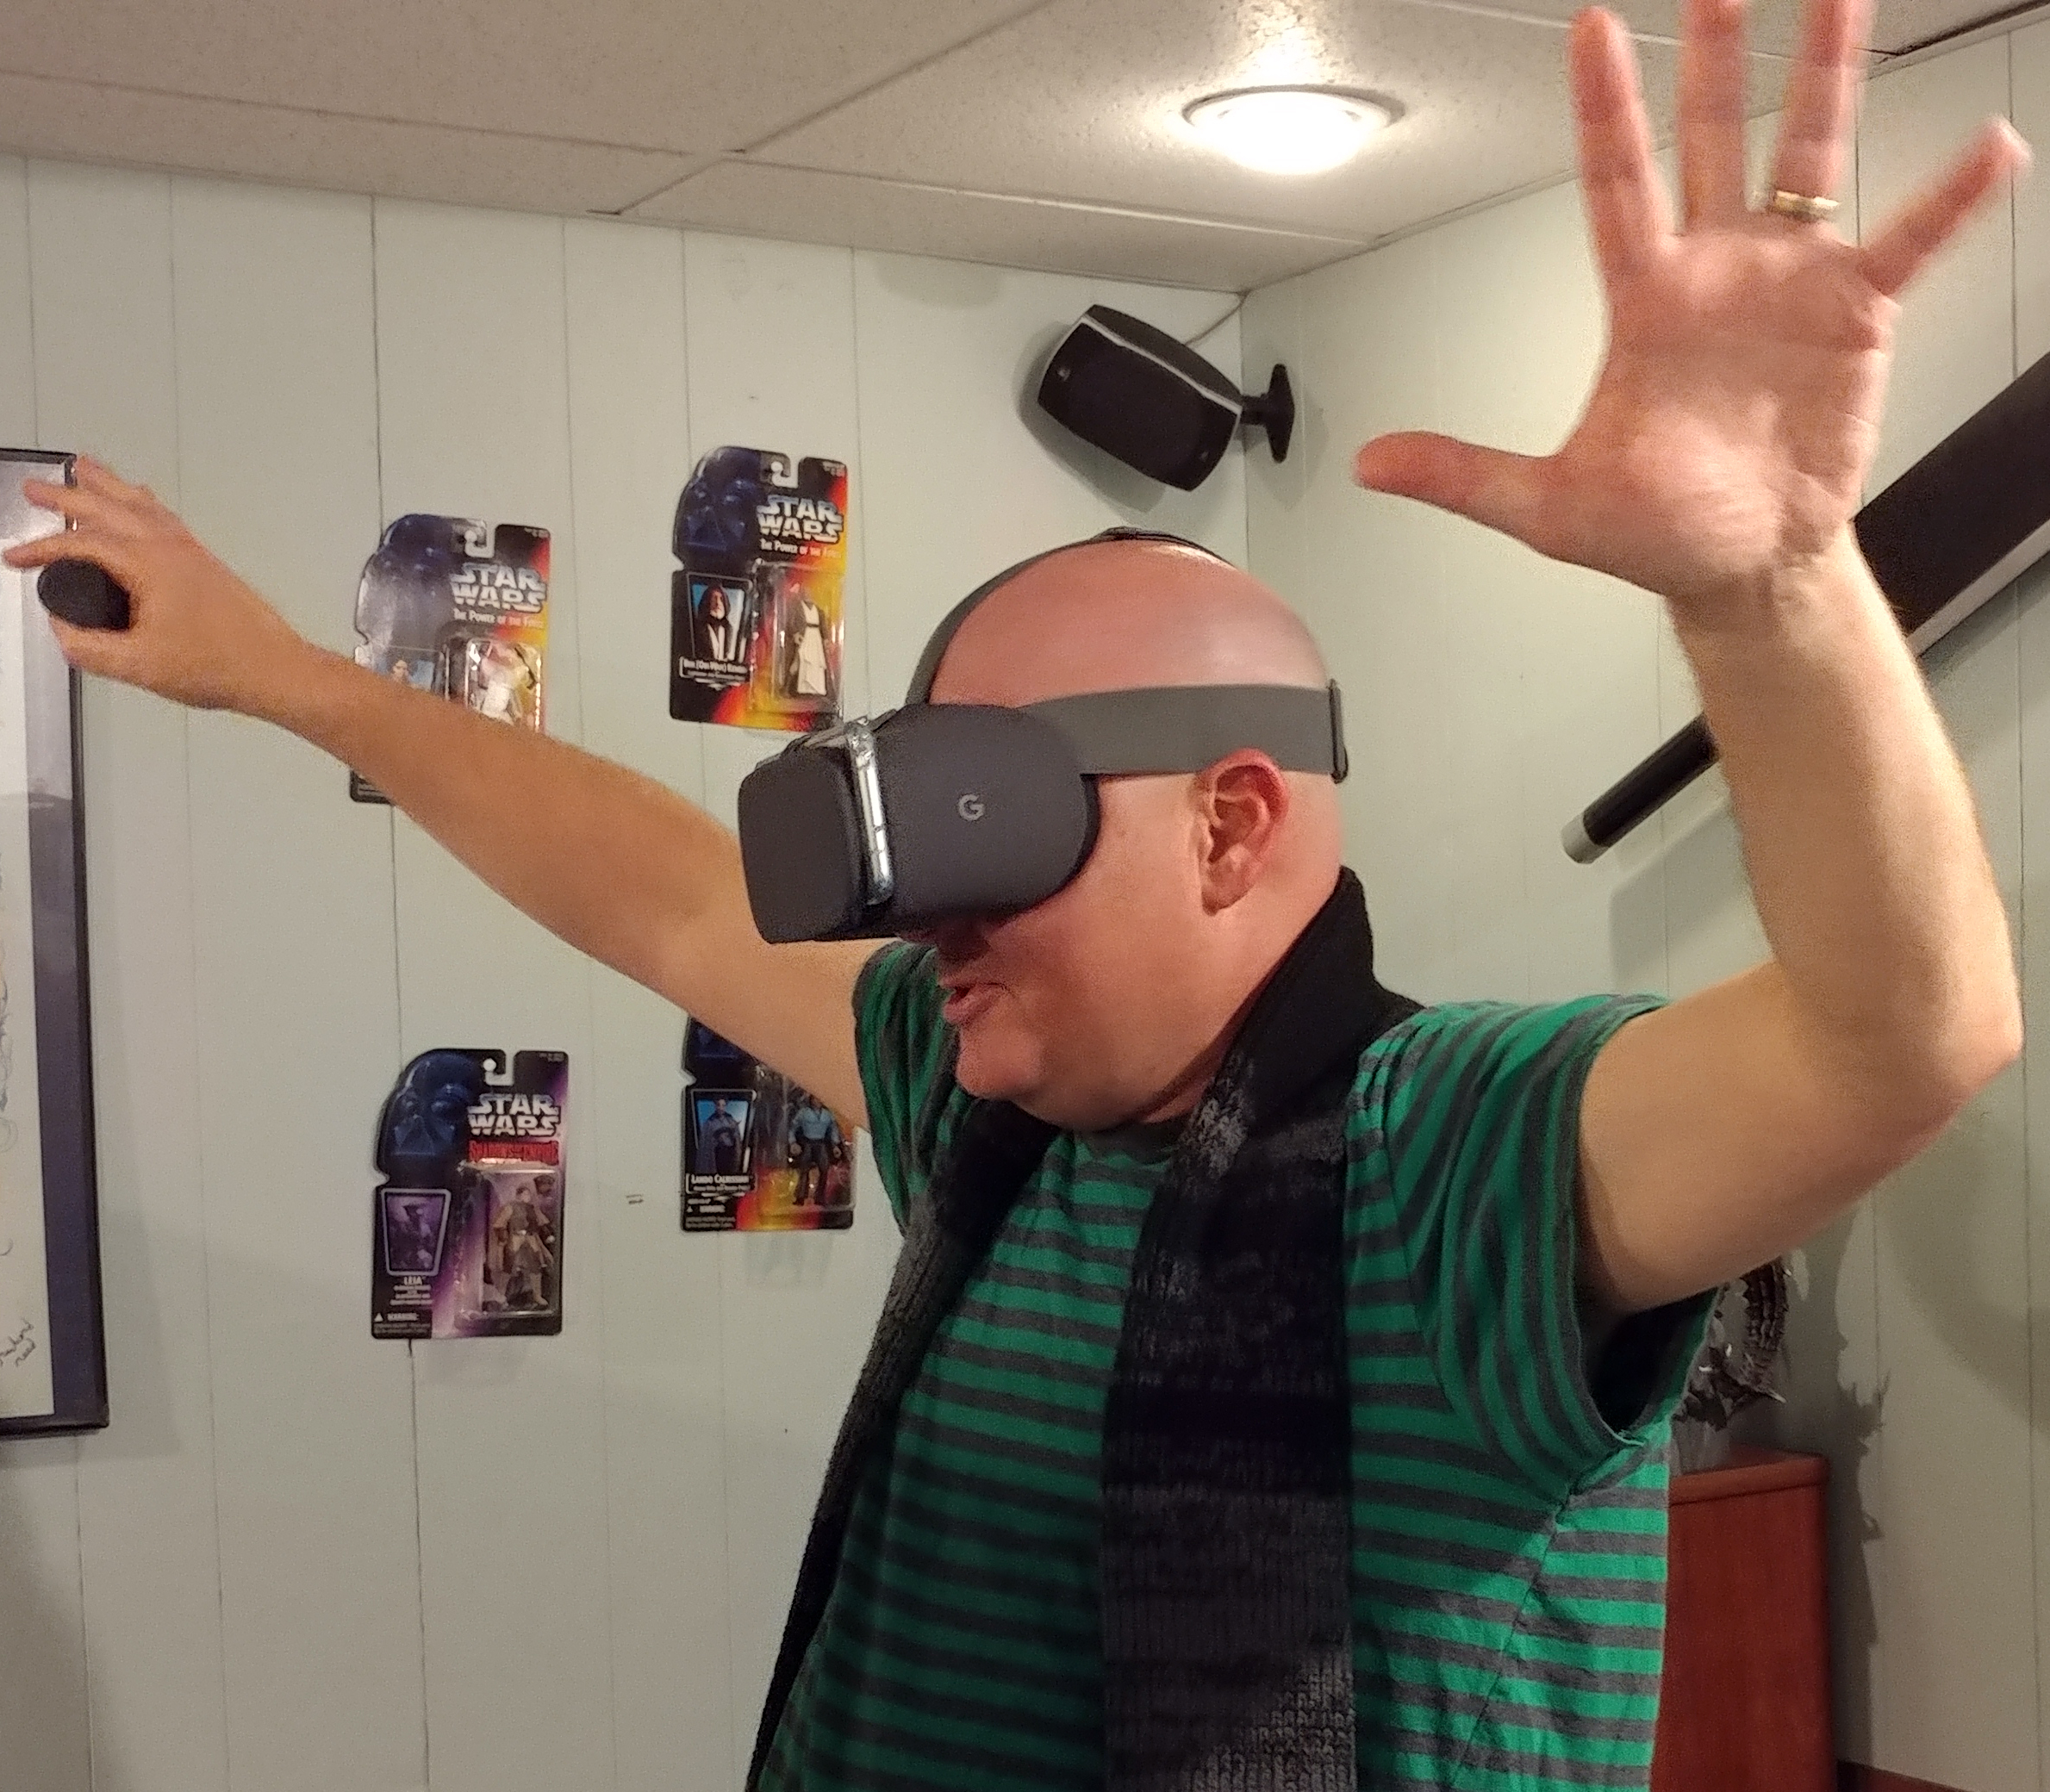 Live Dispatches from Virtual Reality